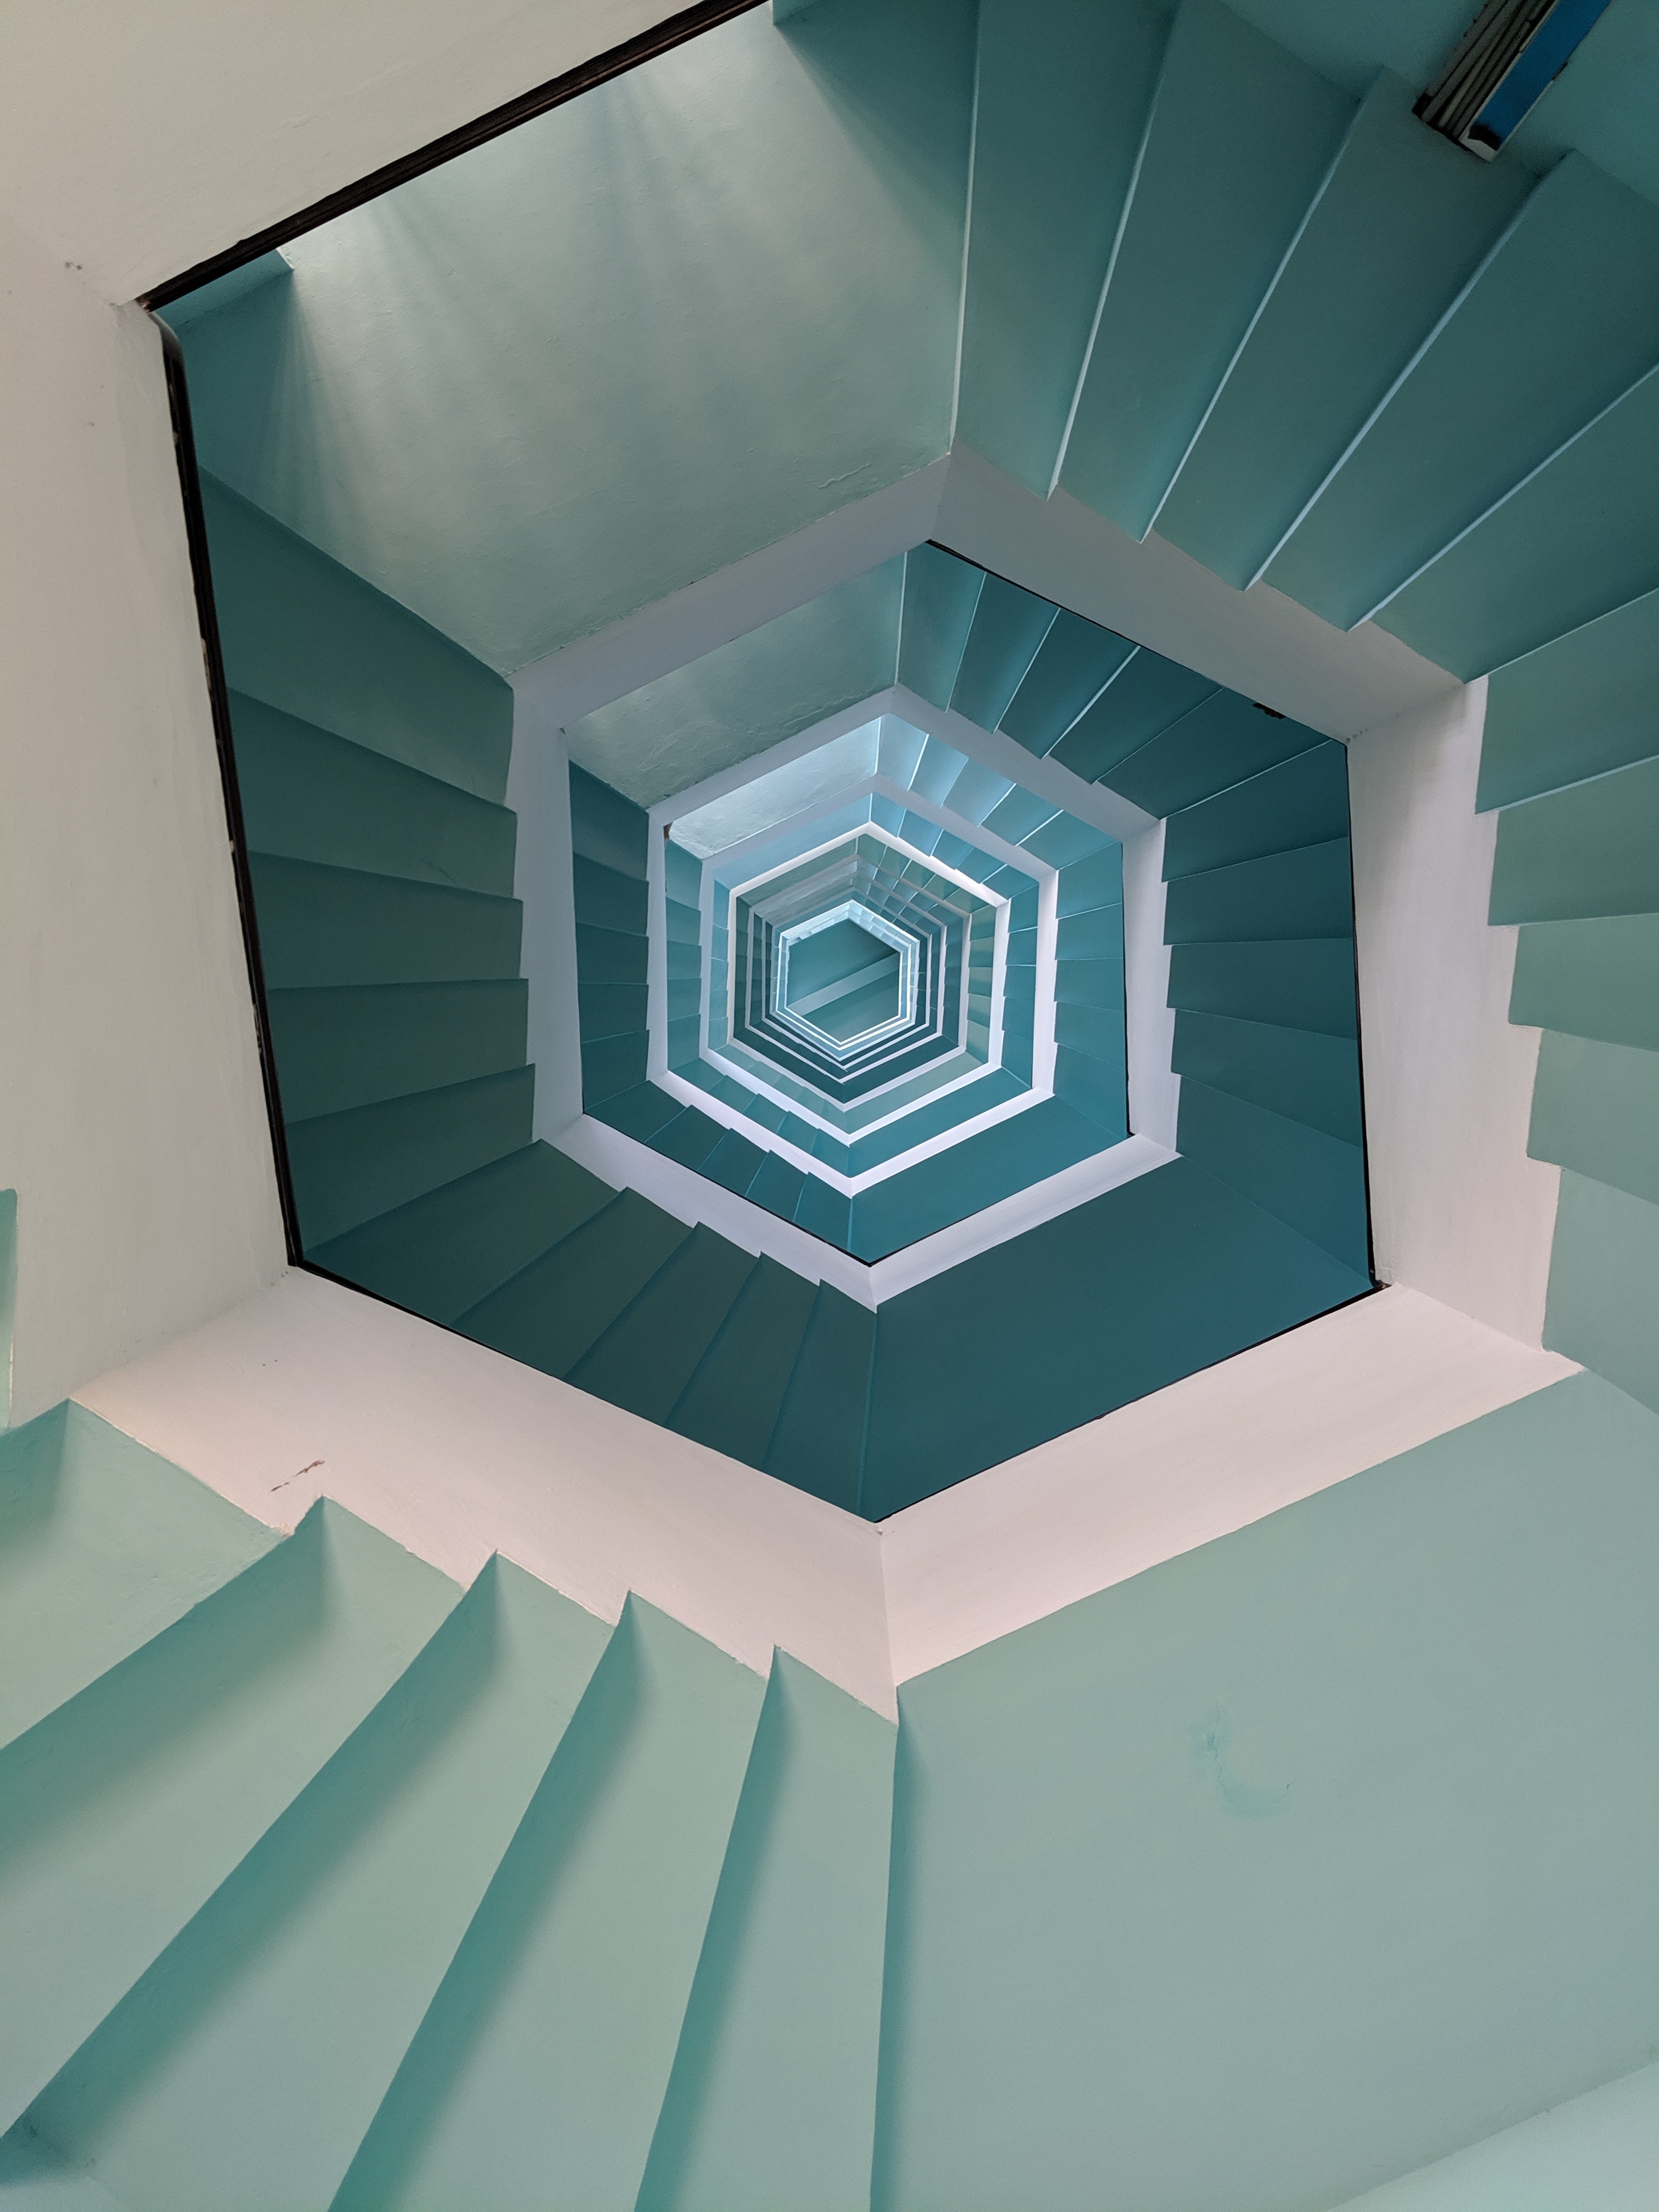 Workplace bullying depicted as a downward spiral staircase in light green and white.